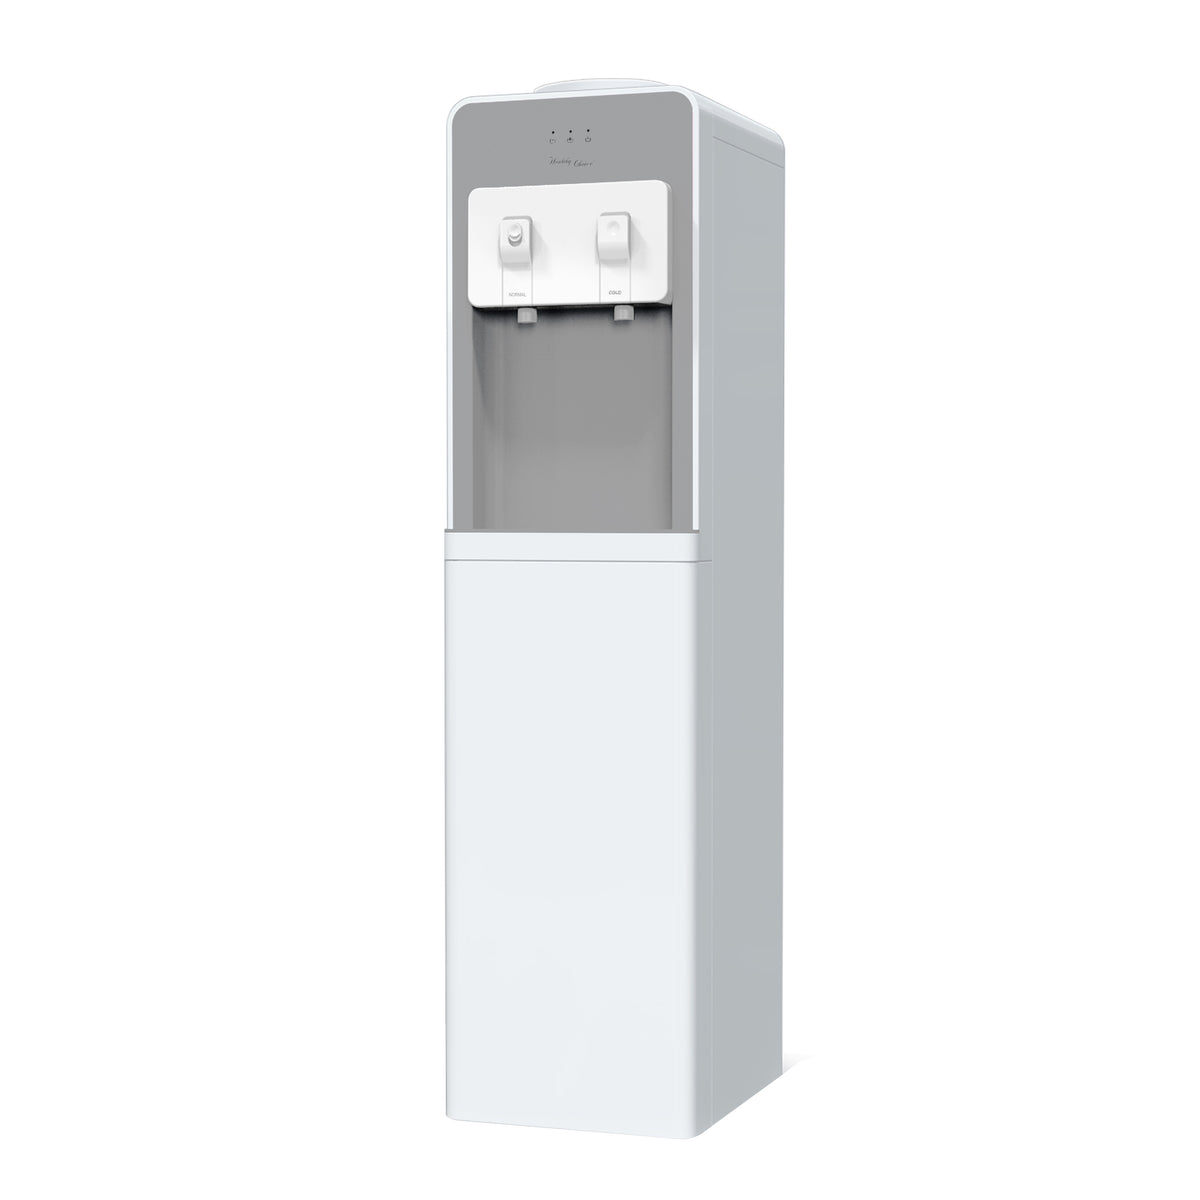 Standing Cooler, Filter & Water Dispenser with dual tap.